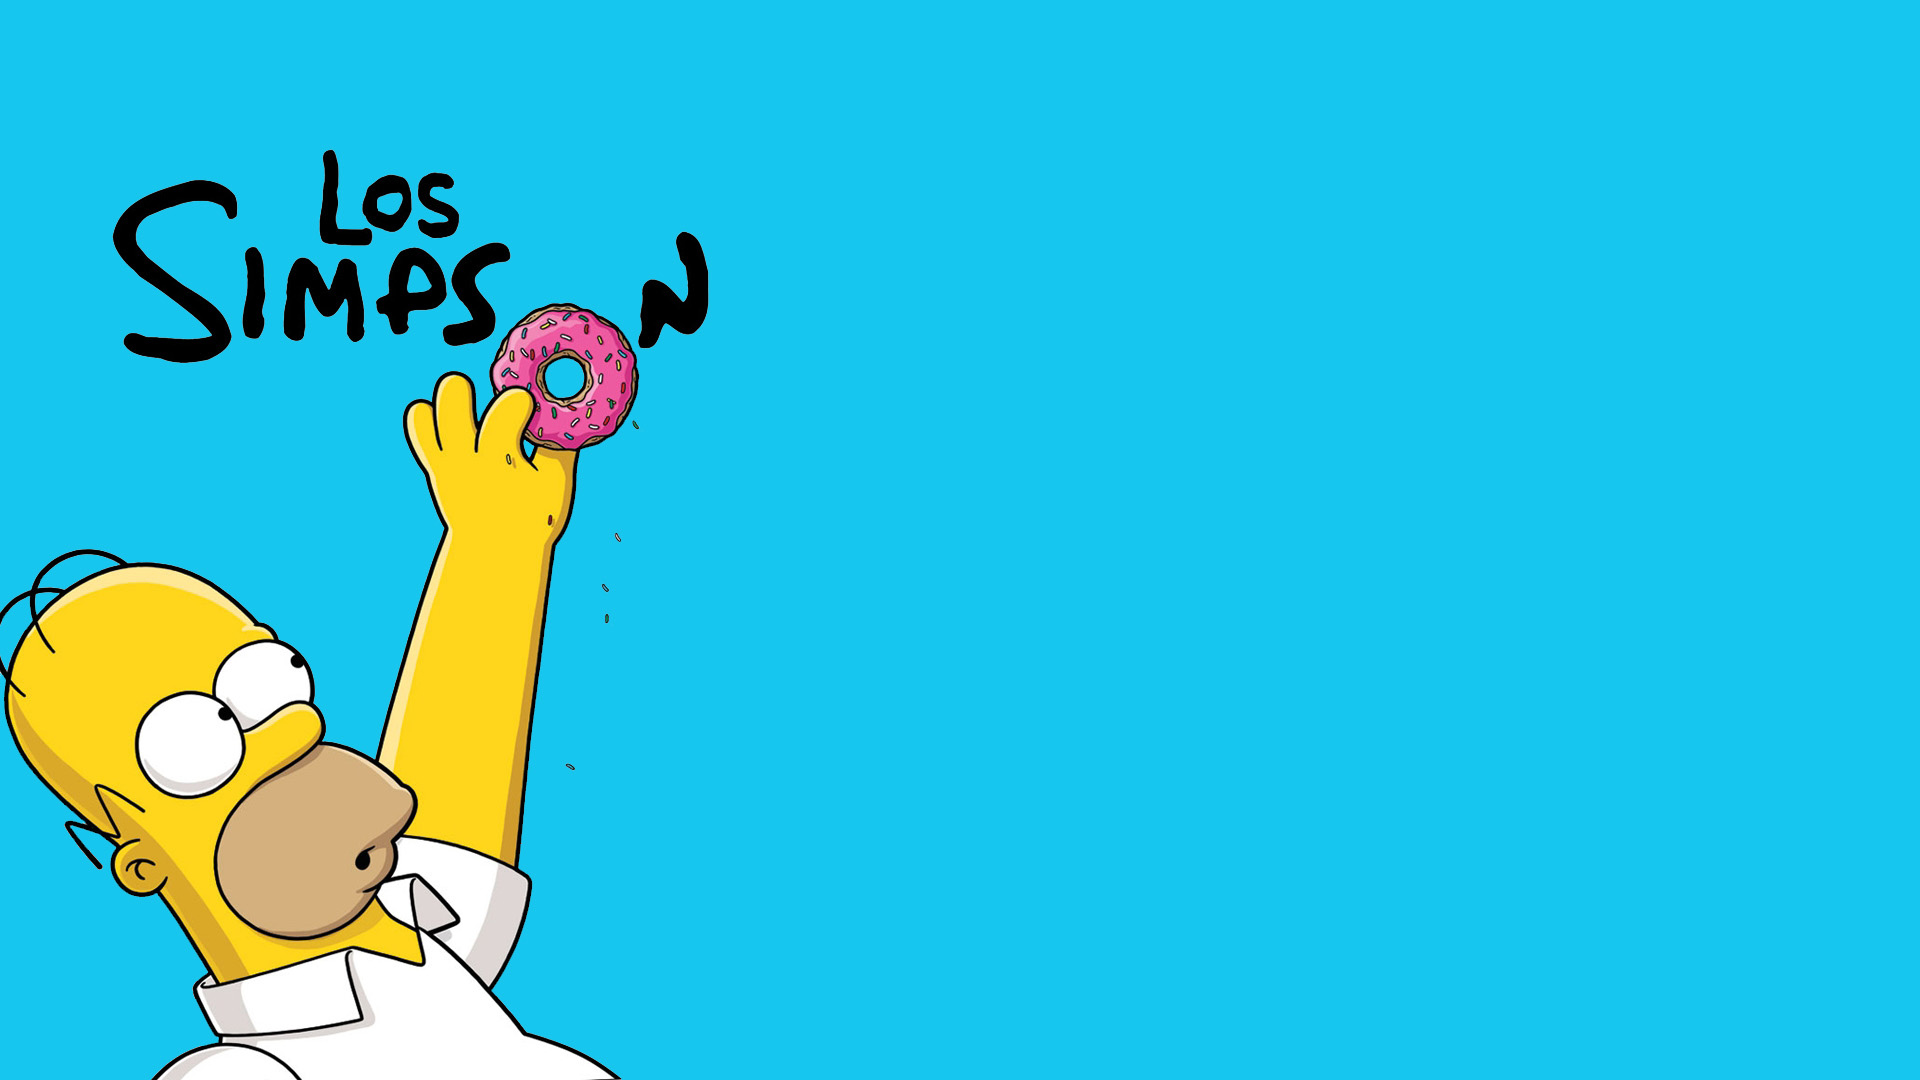 Homer Simpson with a donut wallpaper 2560x1440 - The Simpsons